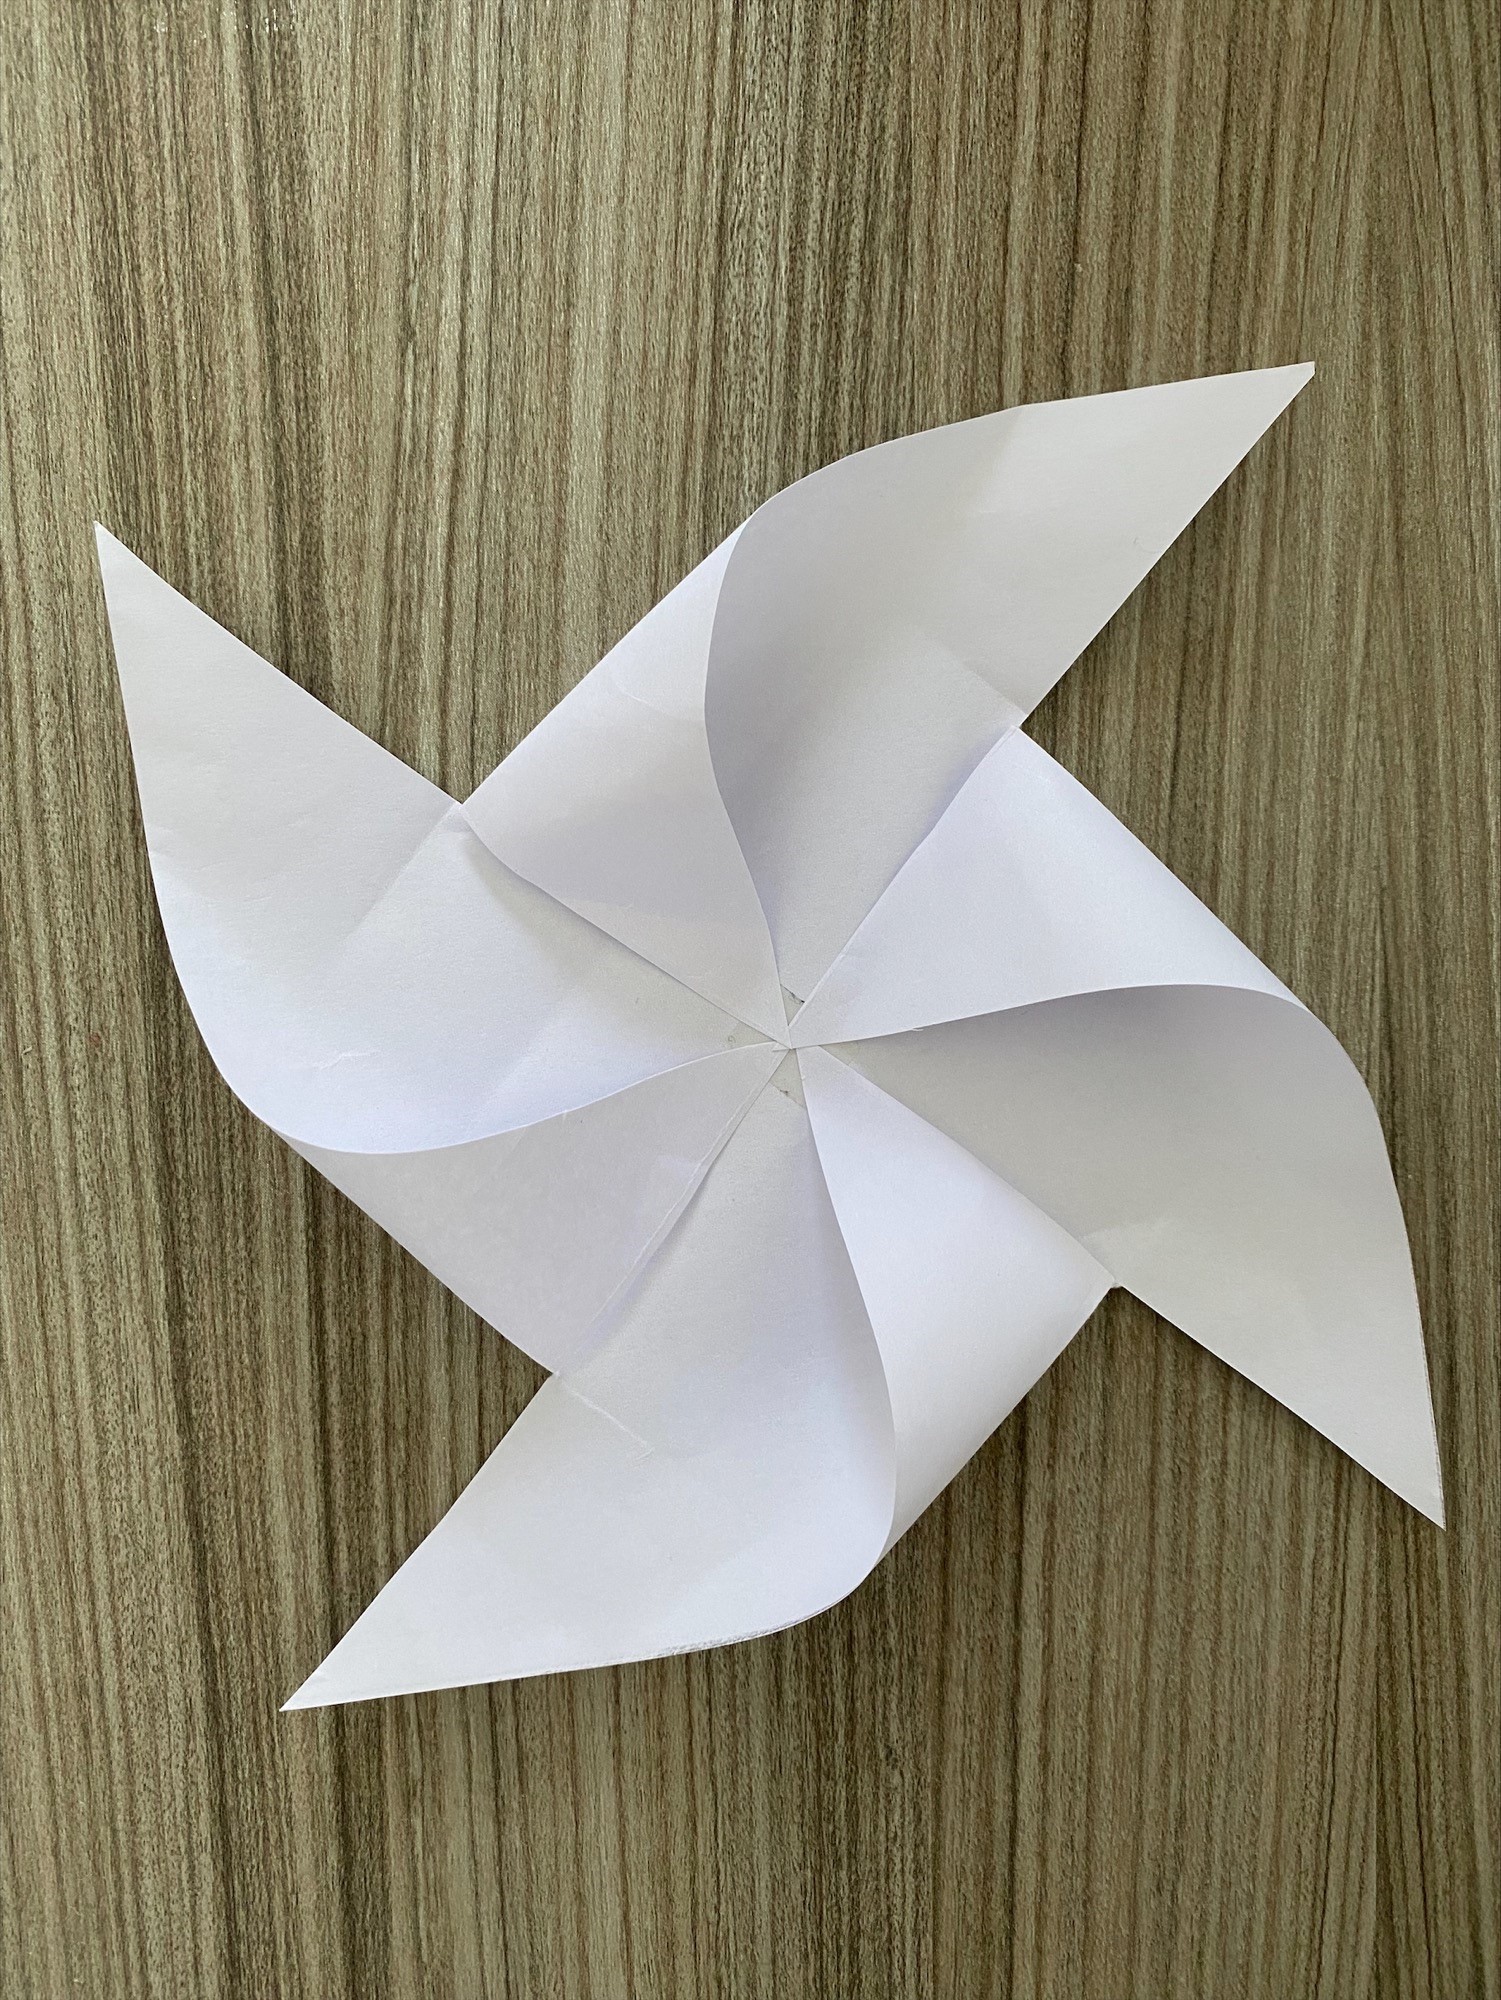 Square piece of paper with every other corner folded into the center to make a windmill